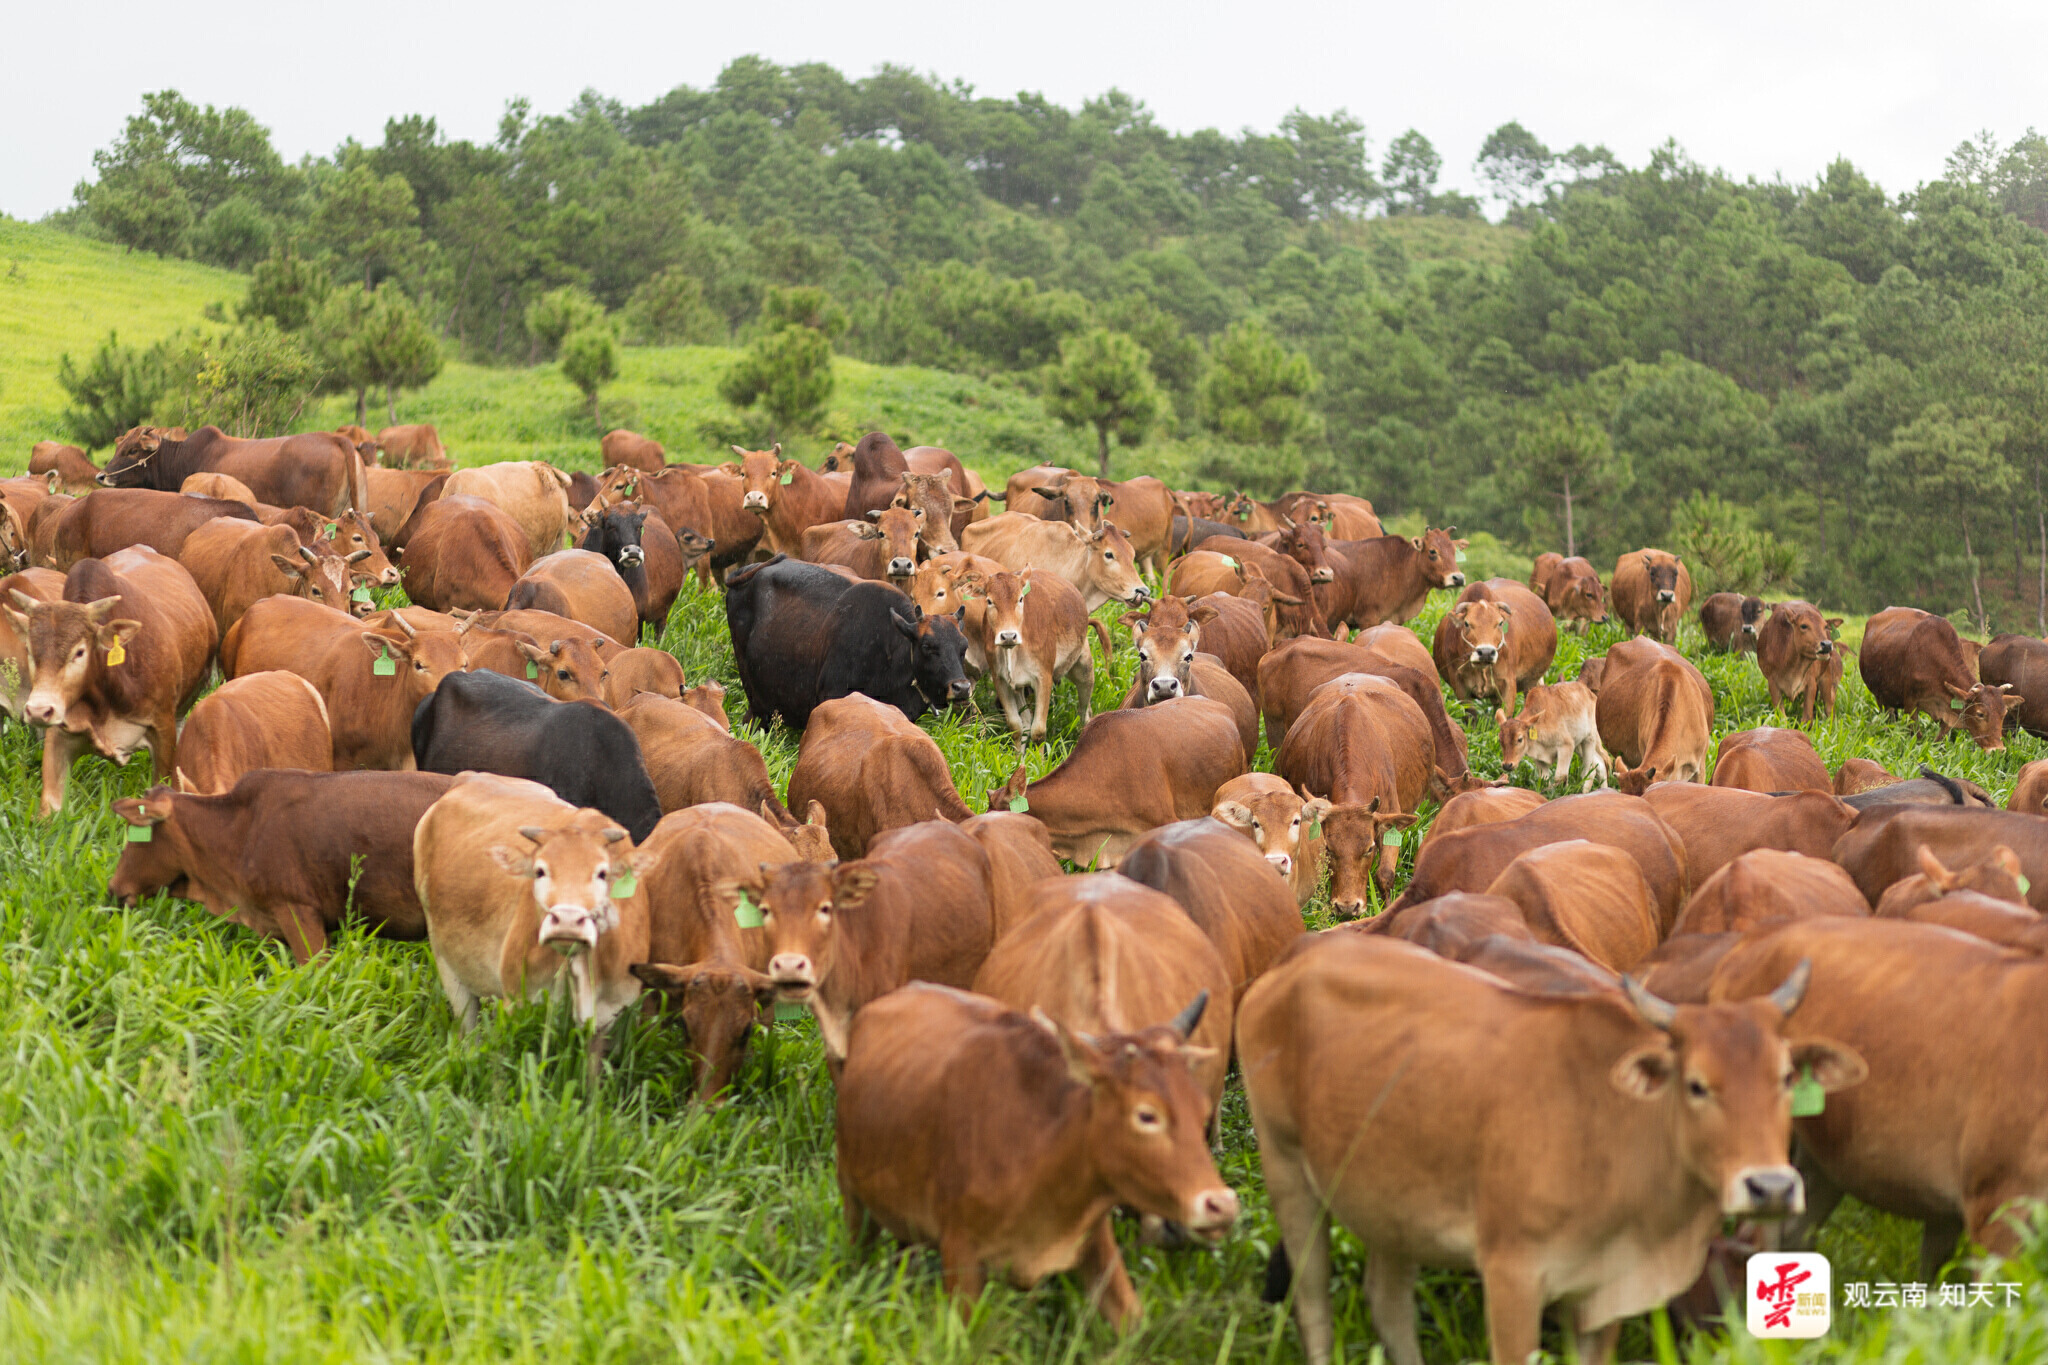 Wenshan to be top cattle producer in China